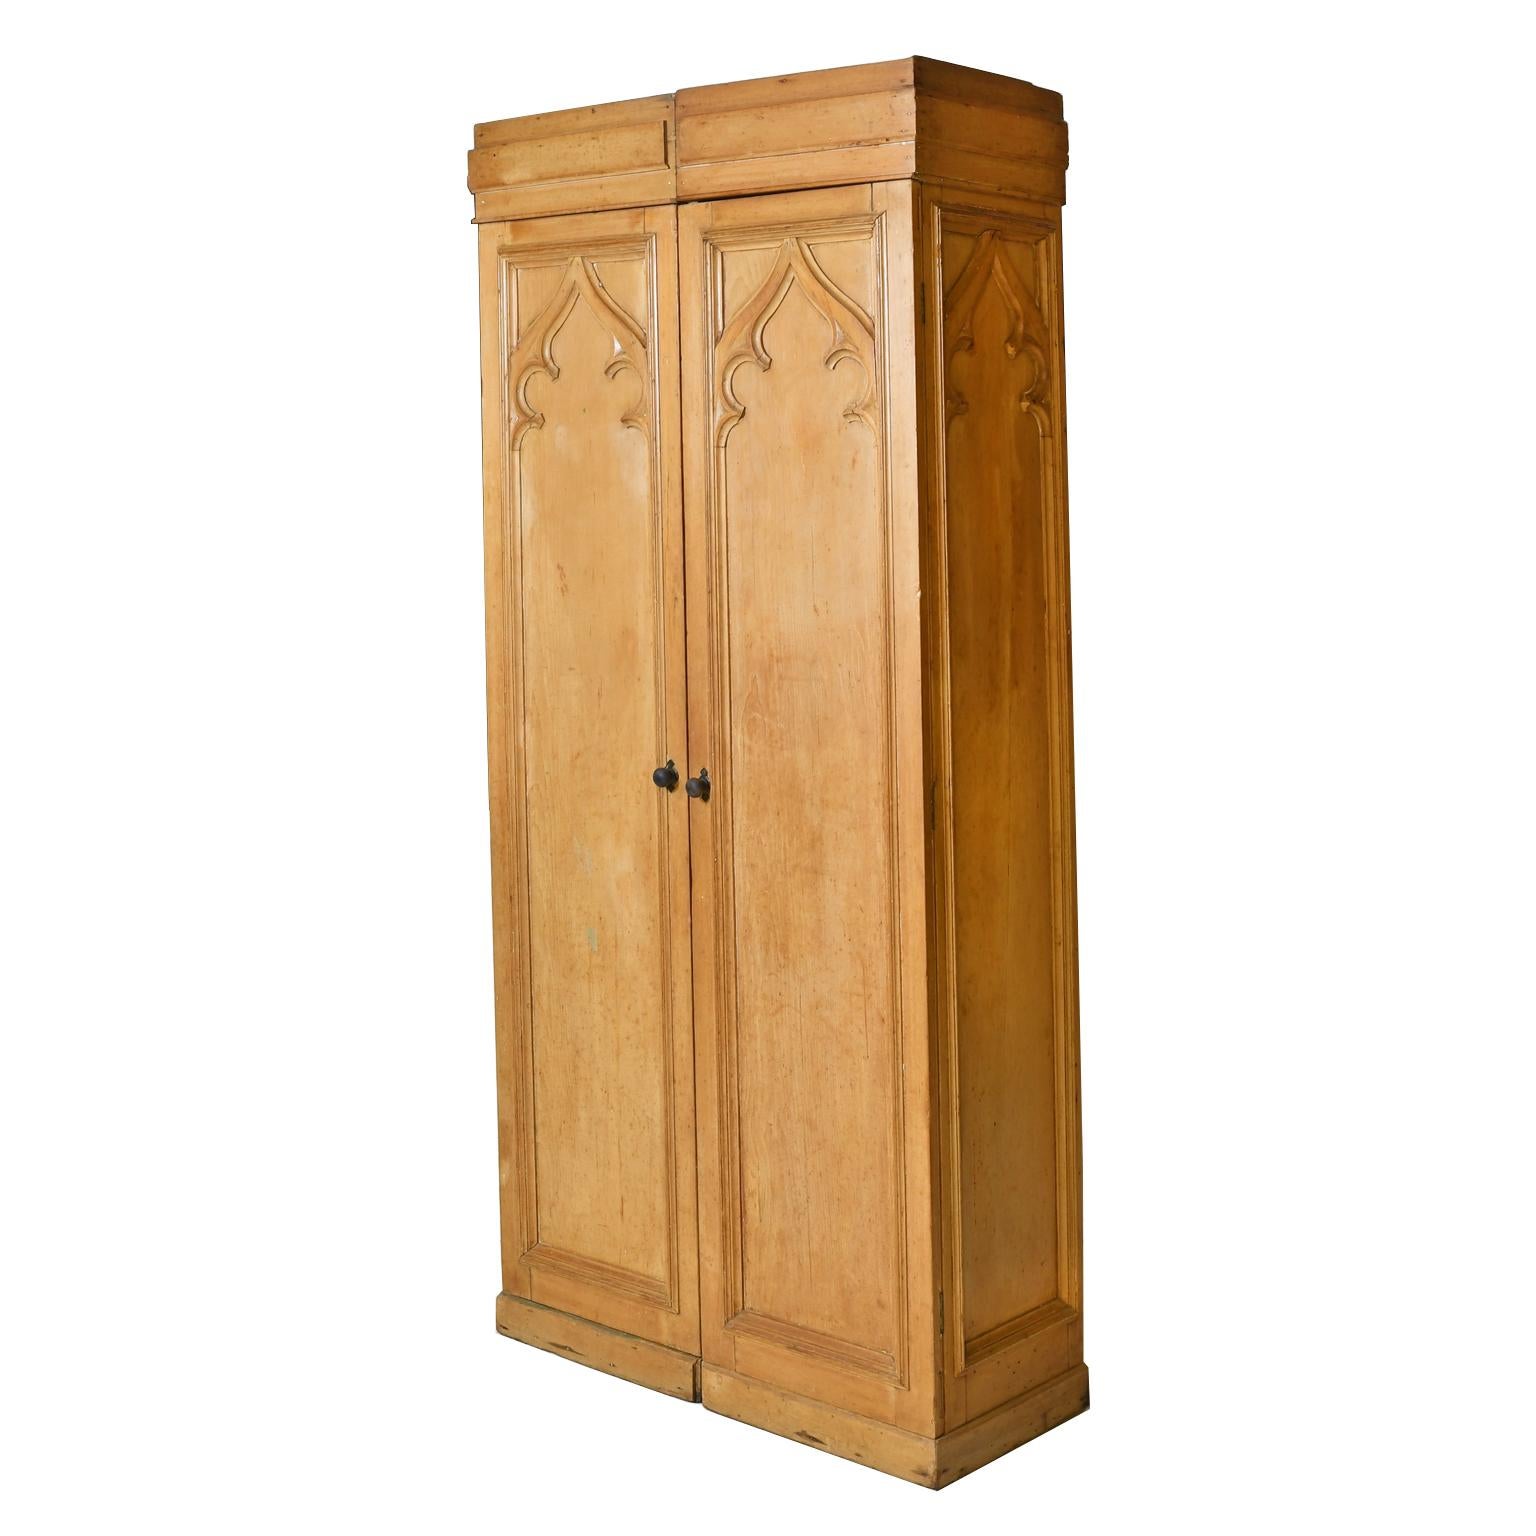 Gothic Revival Pair of Antique Narrow & Tall English Gothic-Revival Lockers in Pine